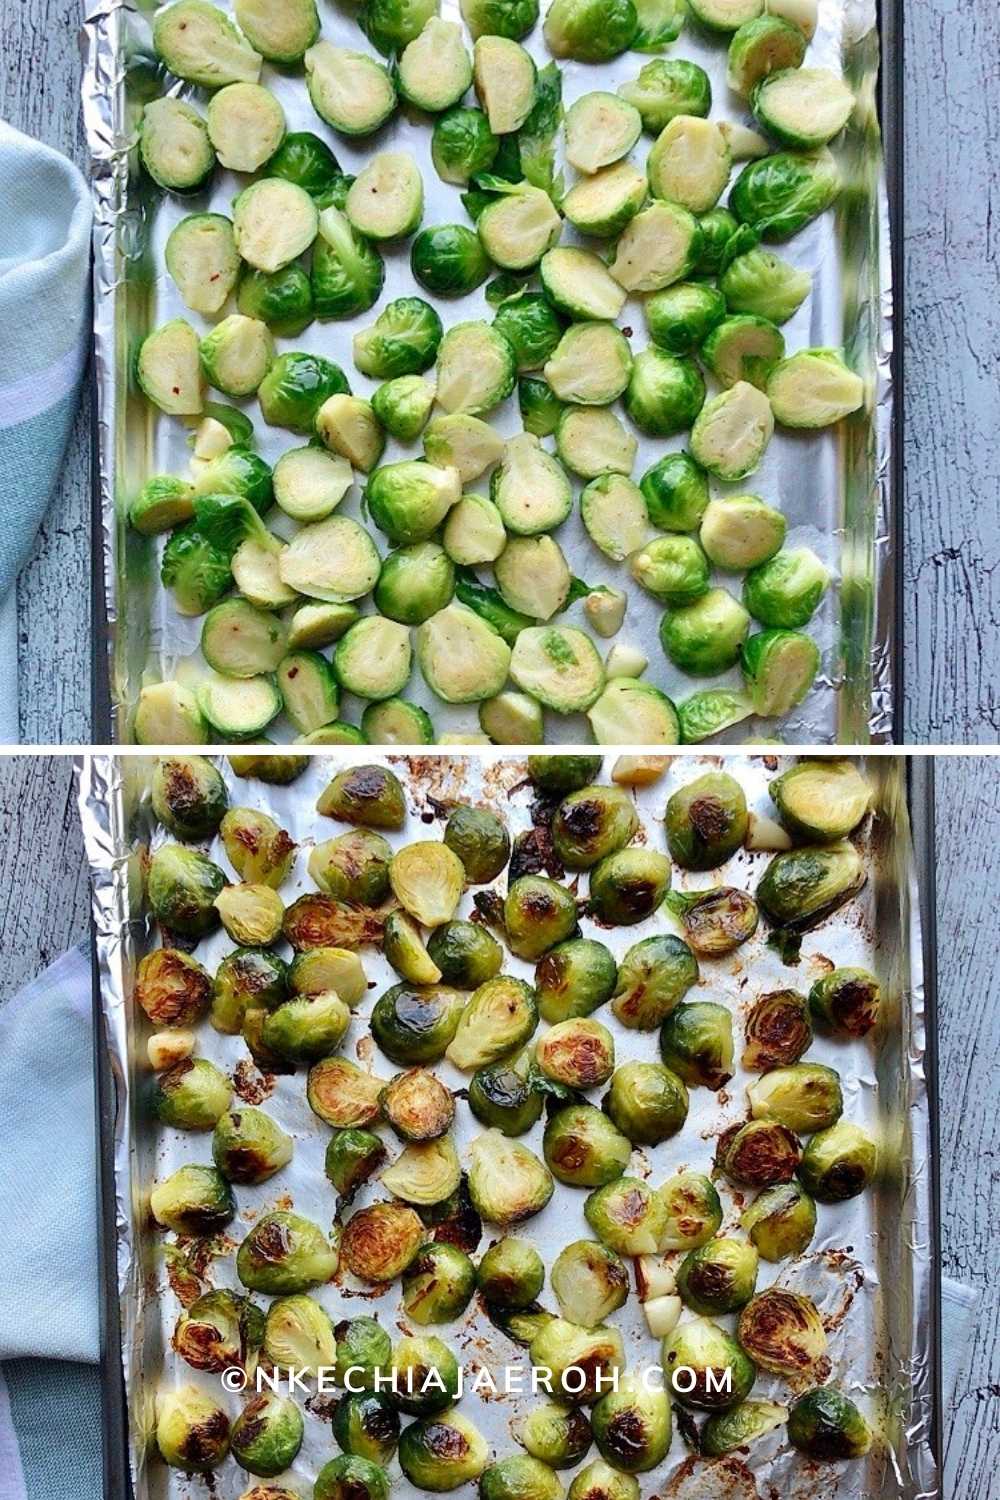 This process photo shows ready to bake/roast Brussels sprouts and perfectly baked Brussels sprouts! Yummy 